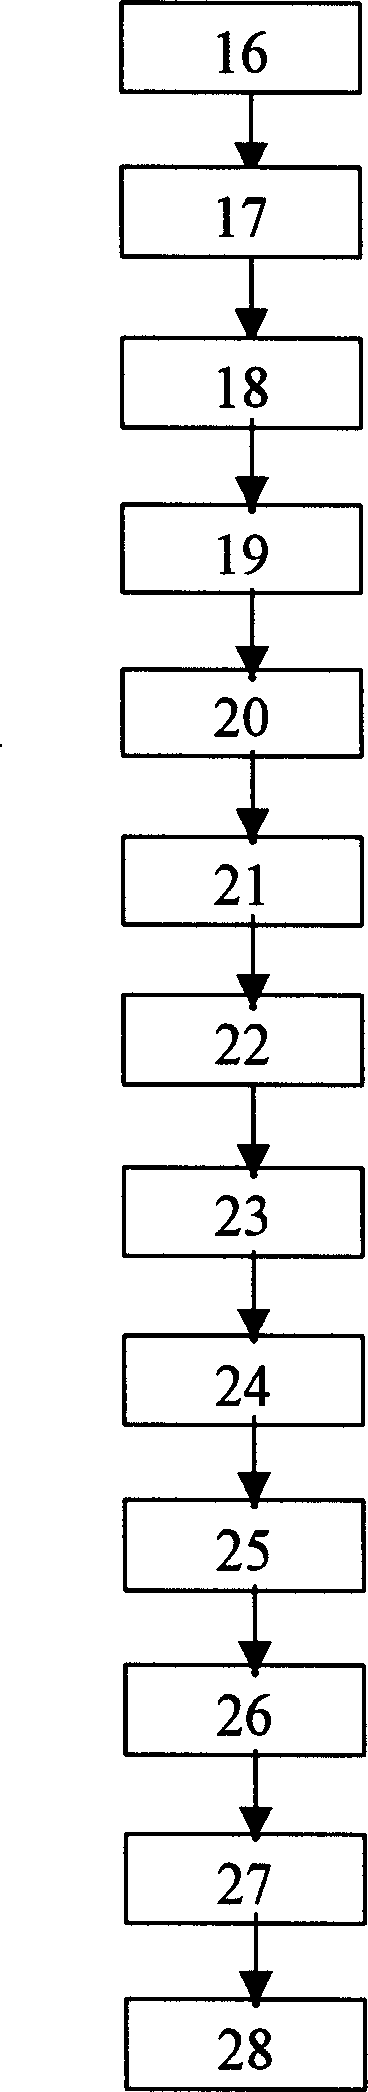 Method for treating shred of tobacco stems